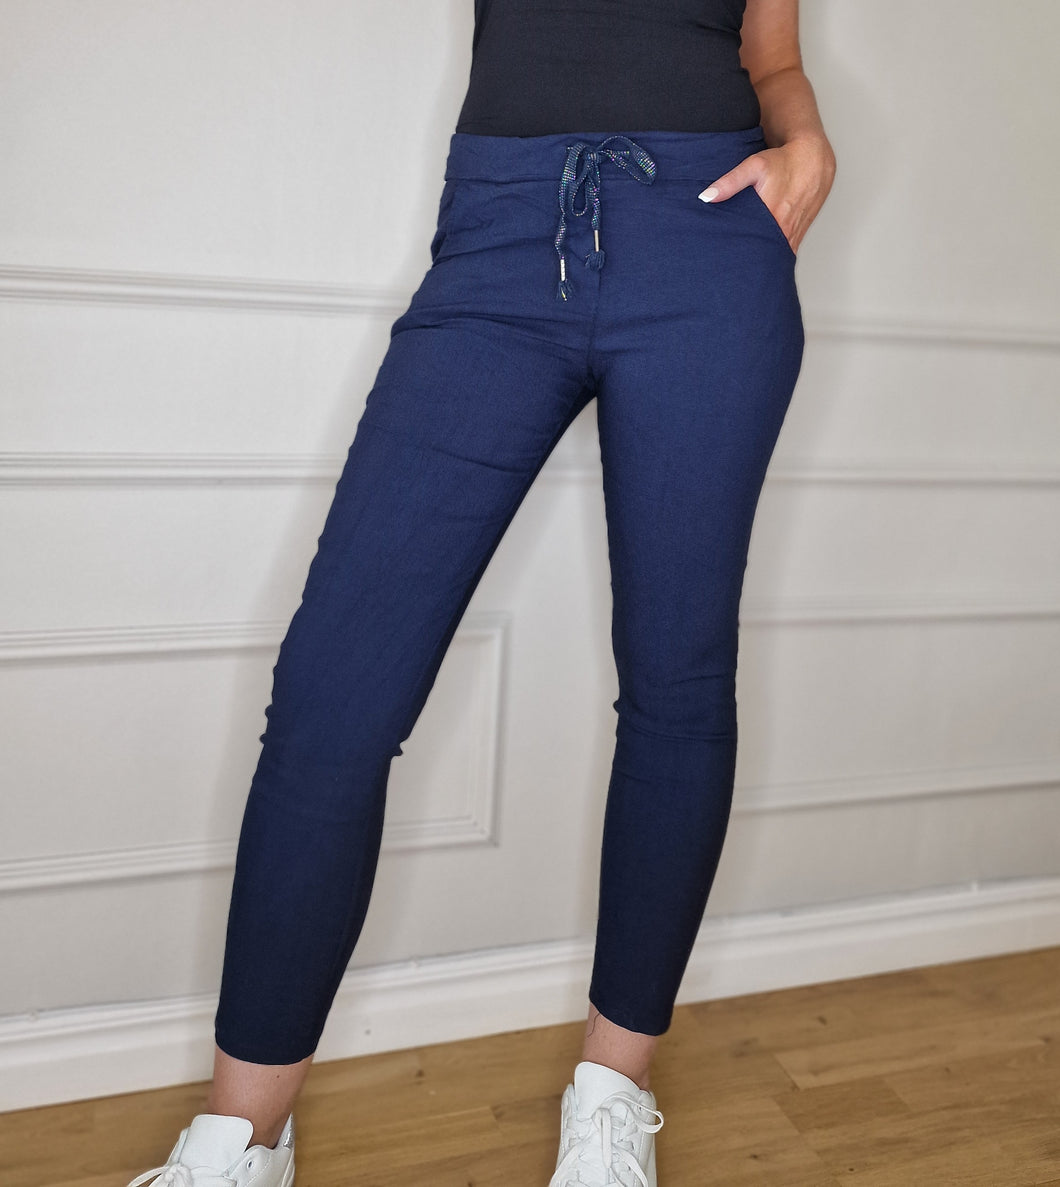 Miracle trousers plain navy blue